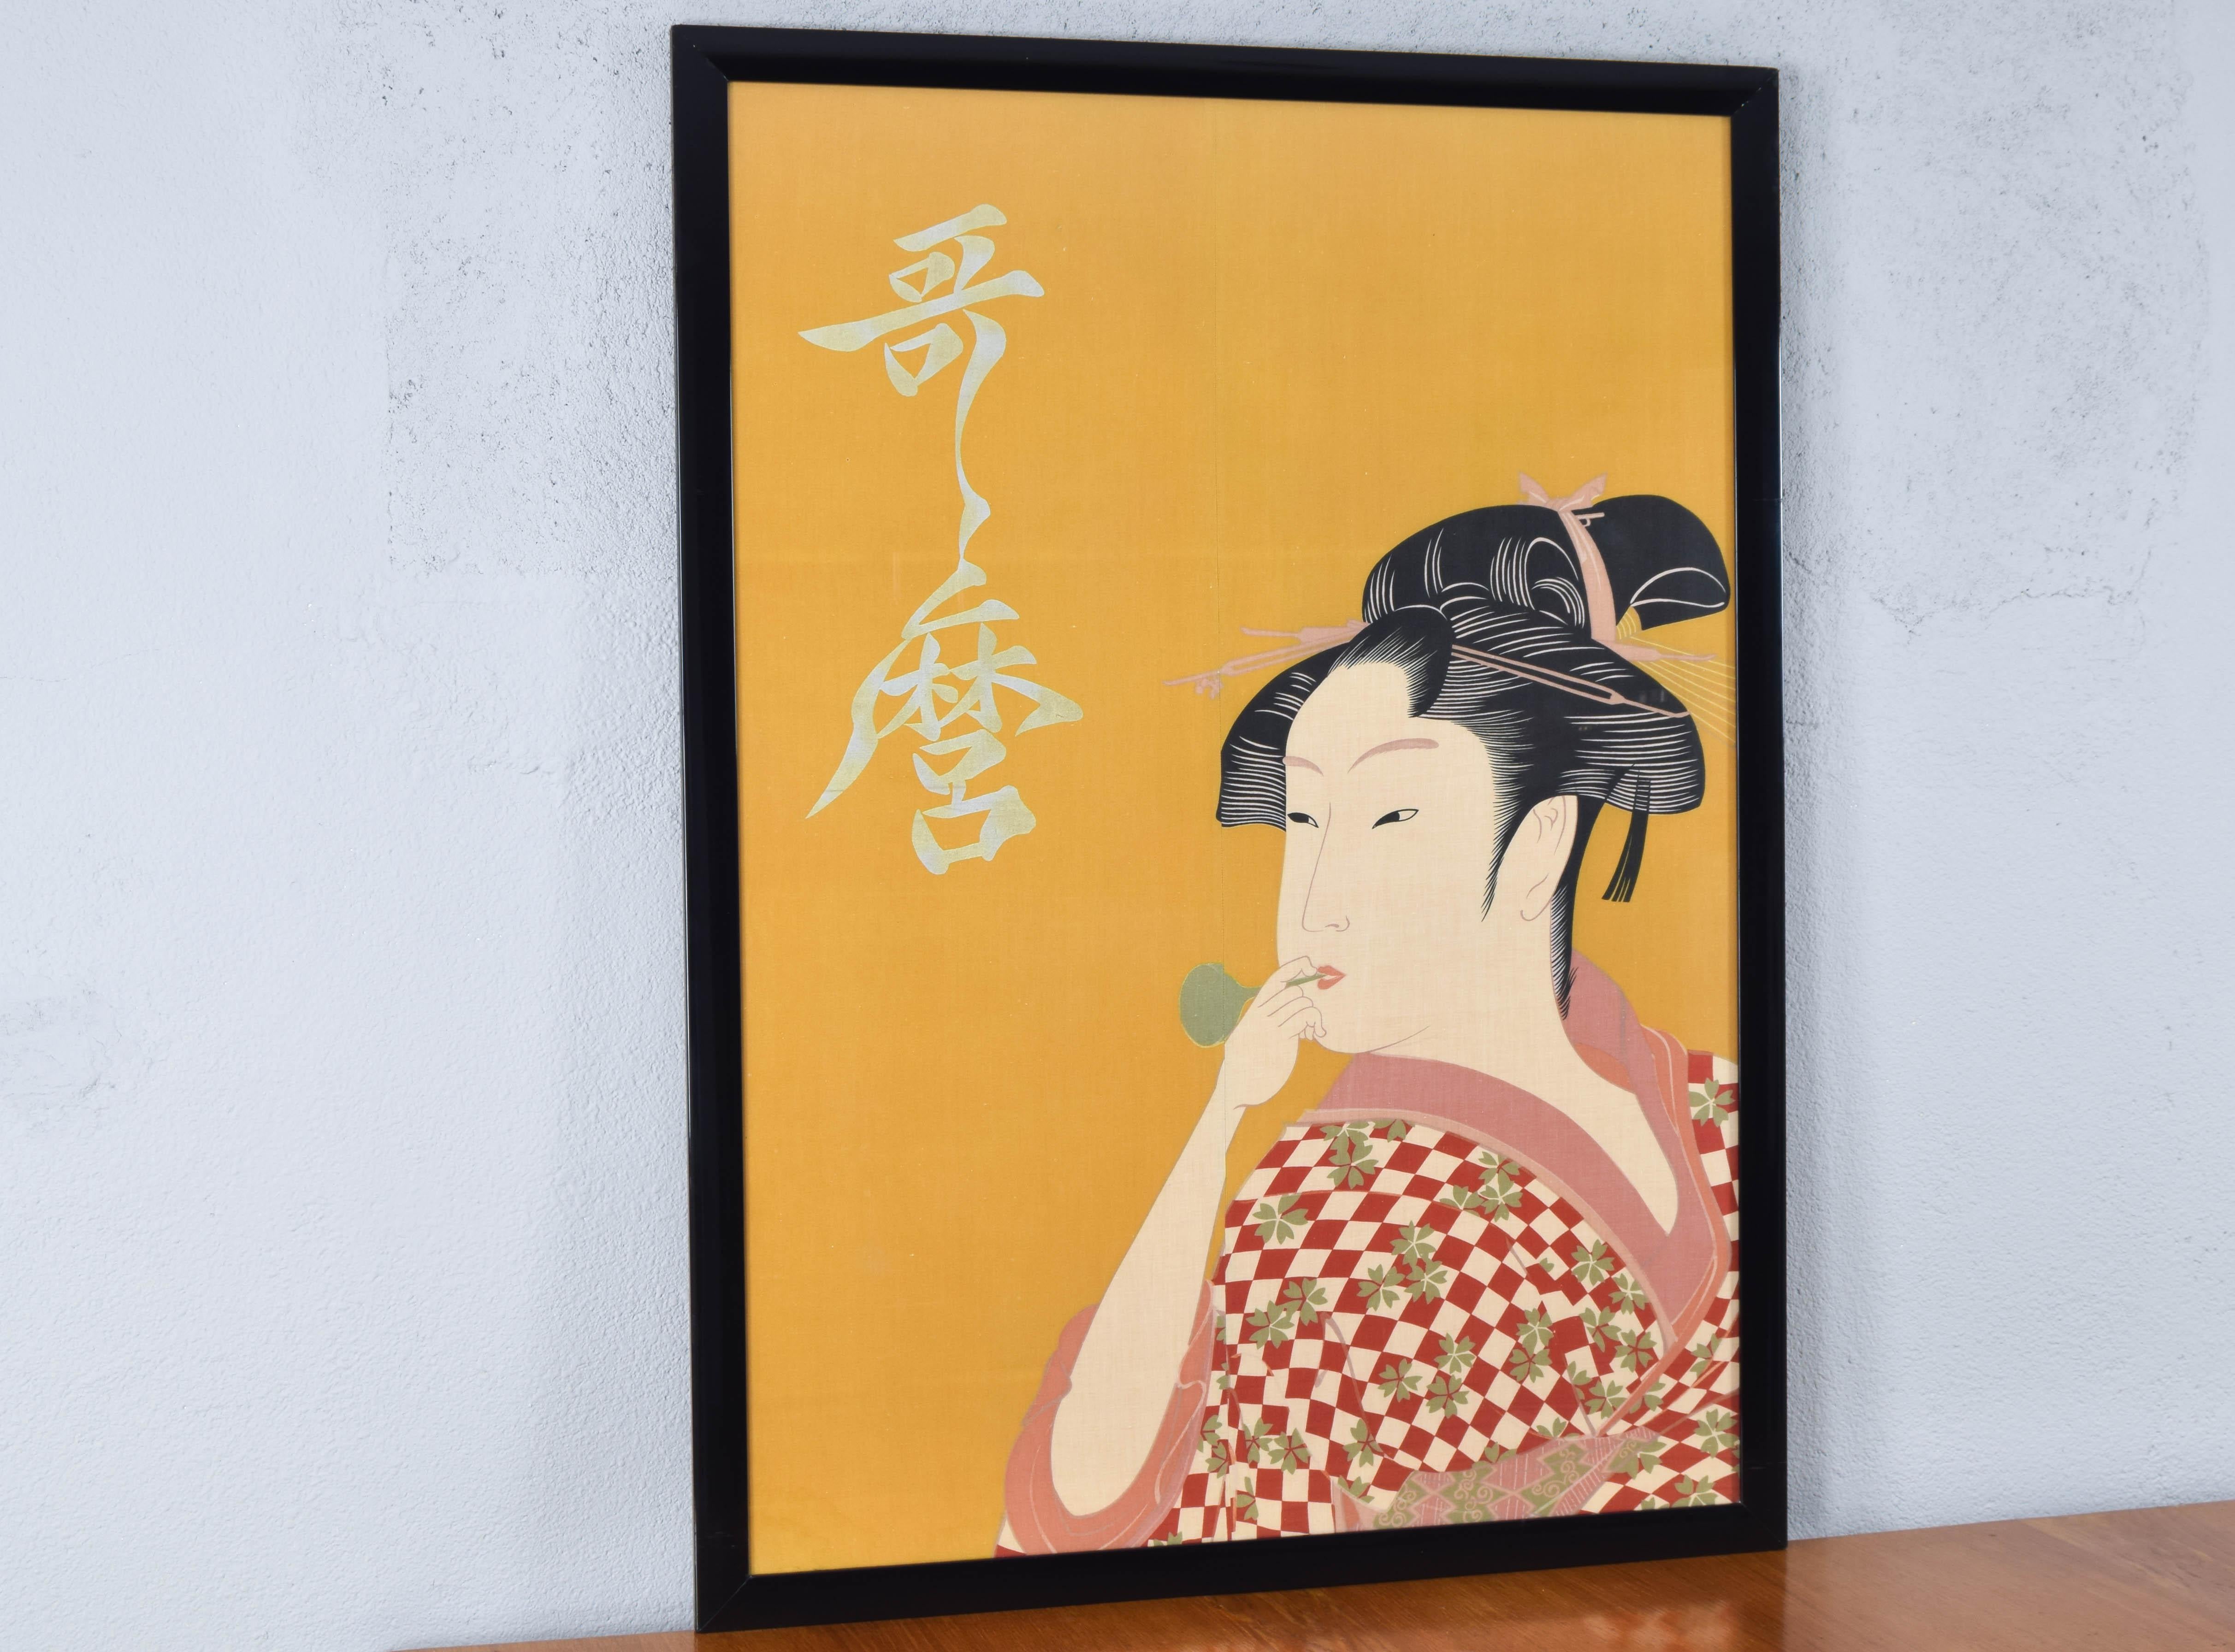 Mid-Century Modern Large Midcentury Canvas Inspired by the Image of Utamaro Woman Playing a Poppin